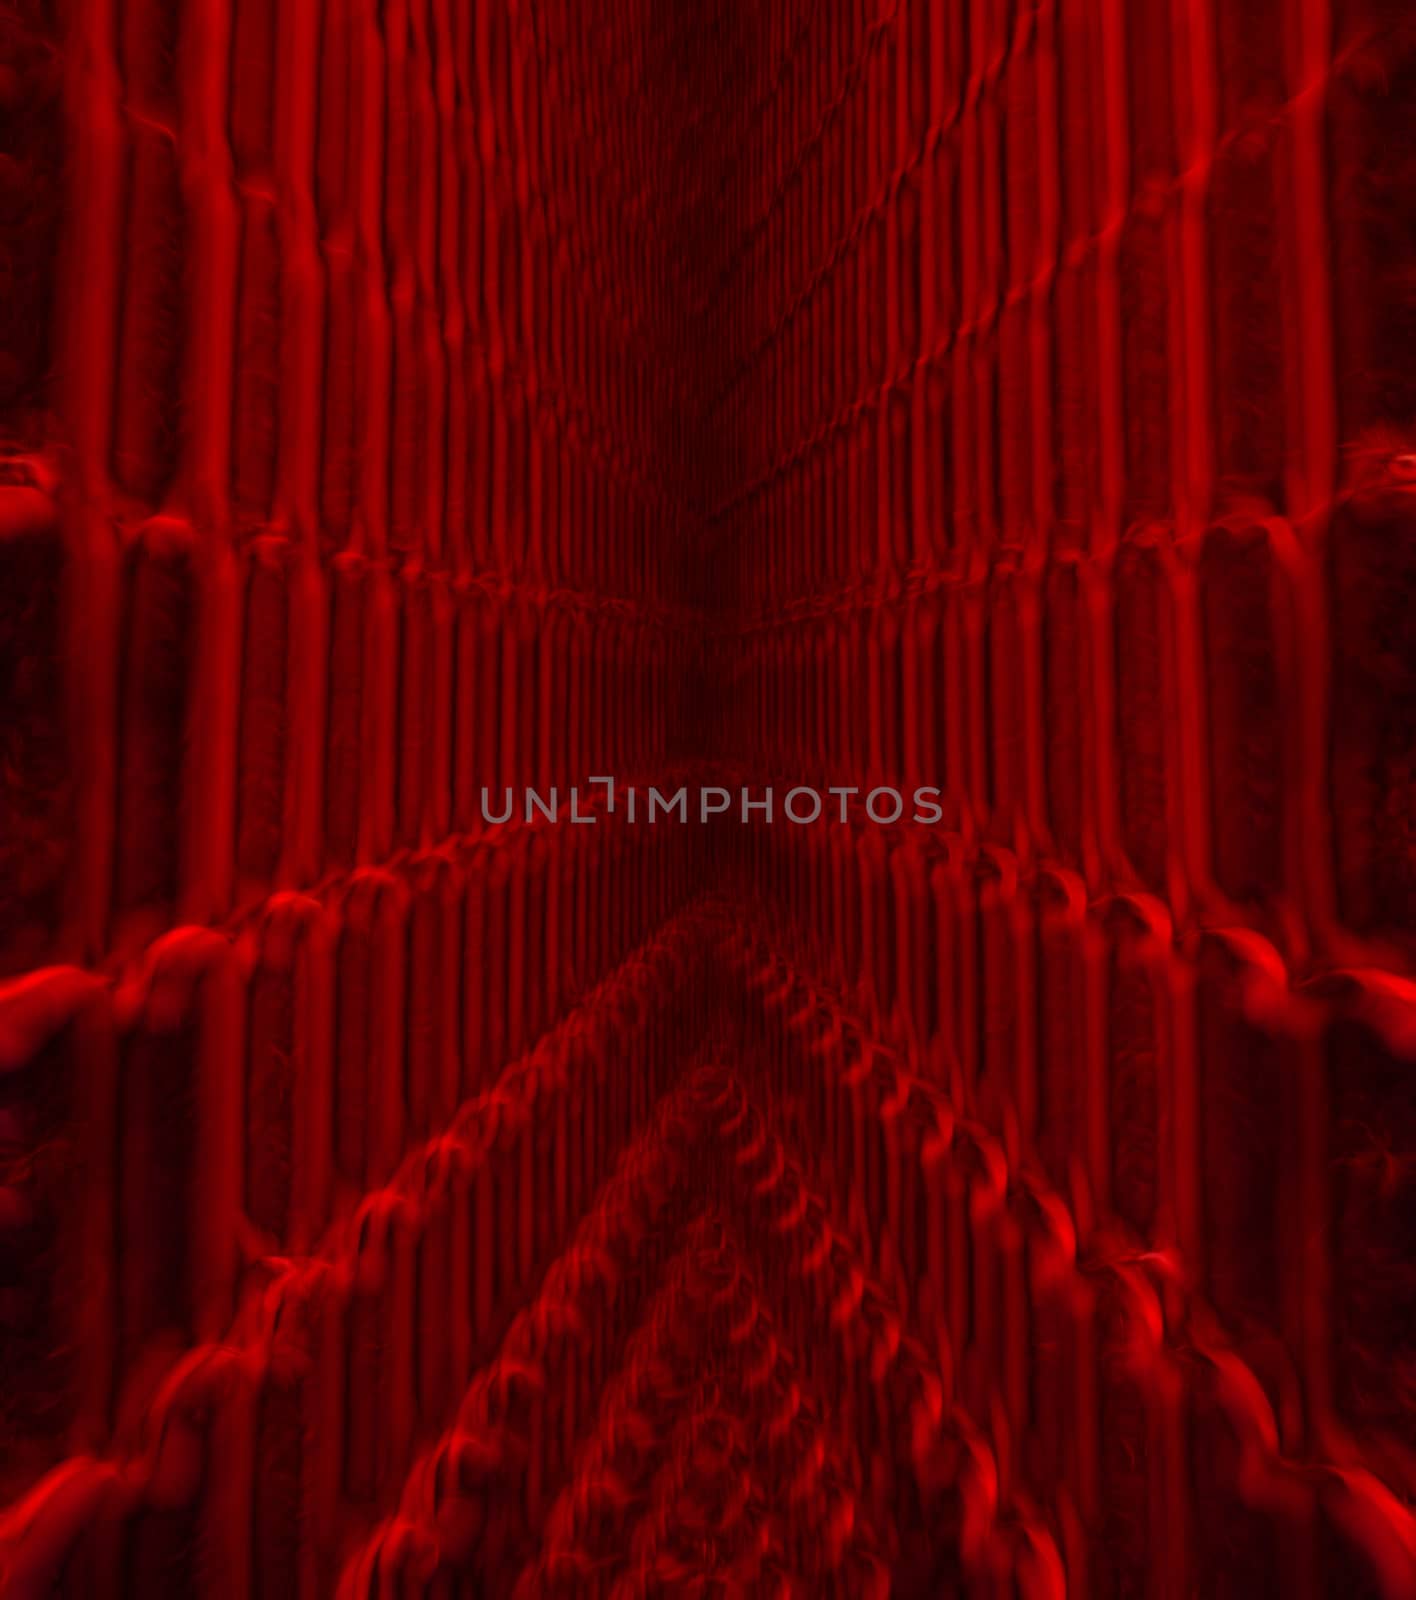 Black and Red background by Krakatuk